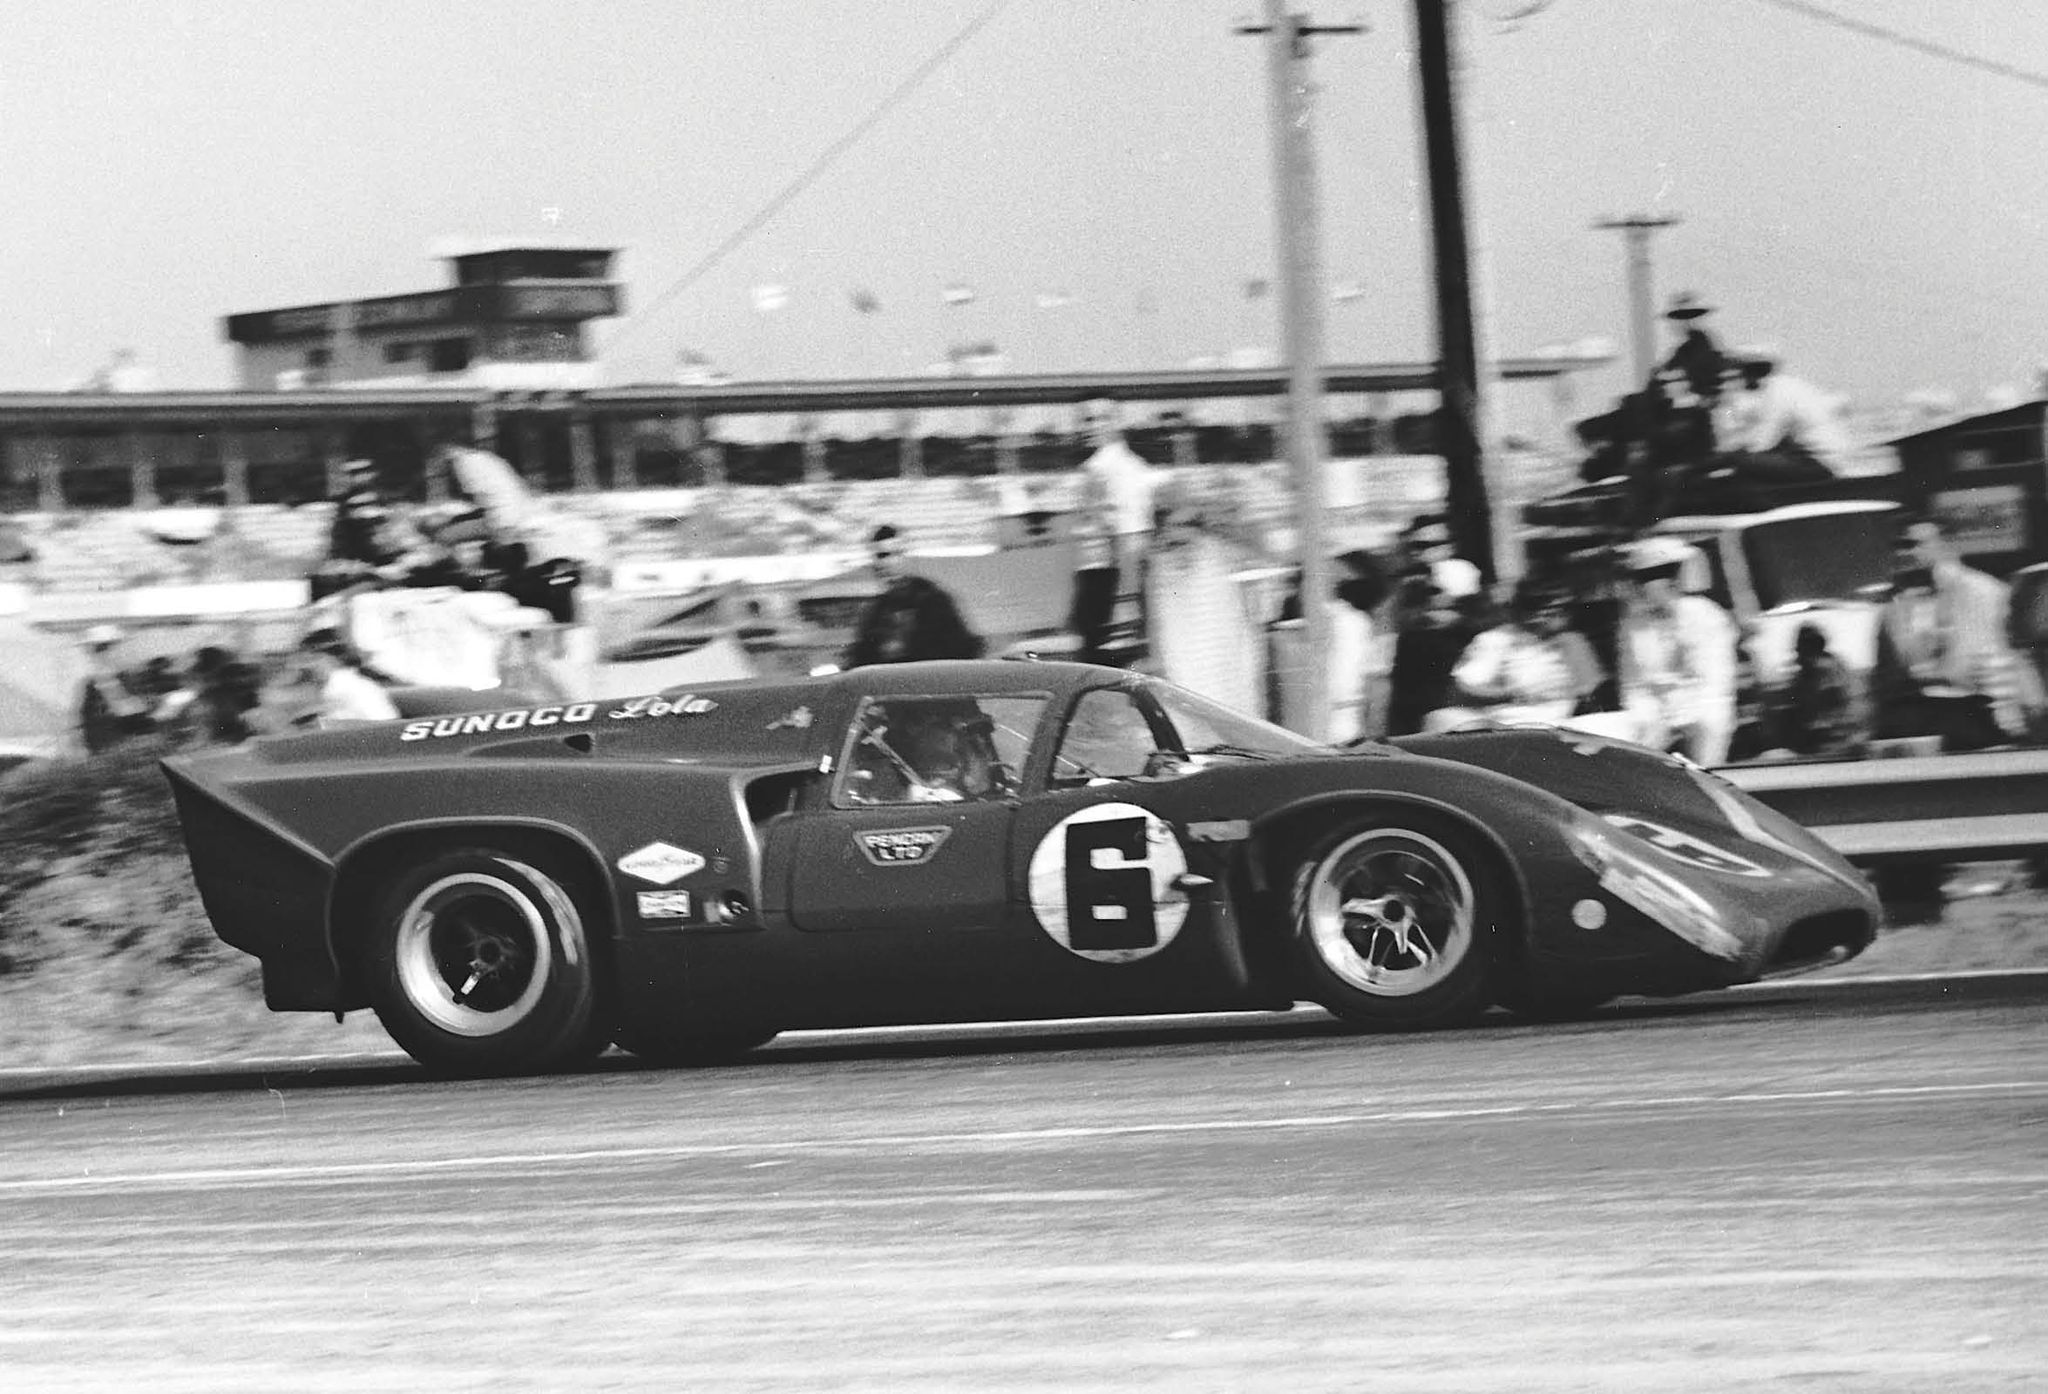 among the litany of racewinning lolas is the t70 the most iconic lola of them all pictured here at the 24 hours of daytona in 1969